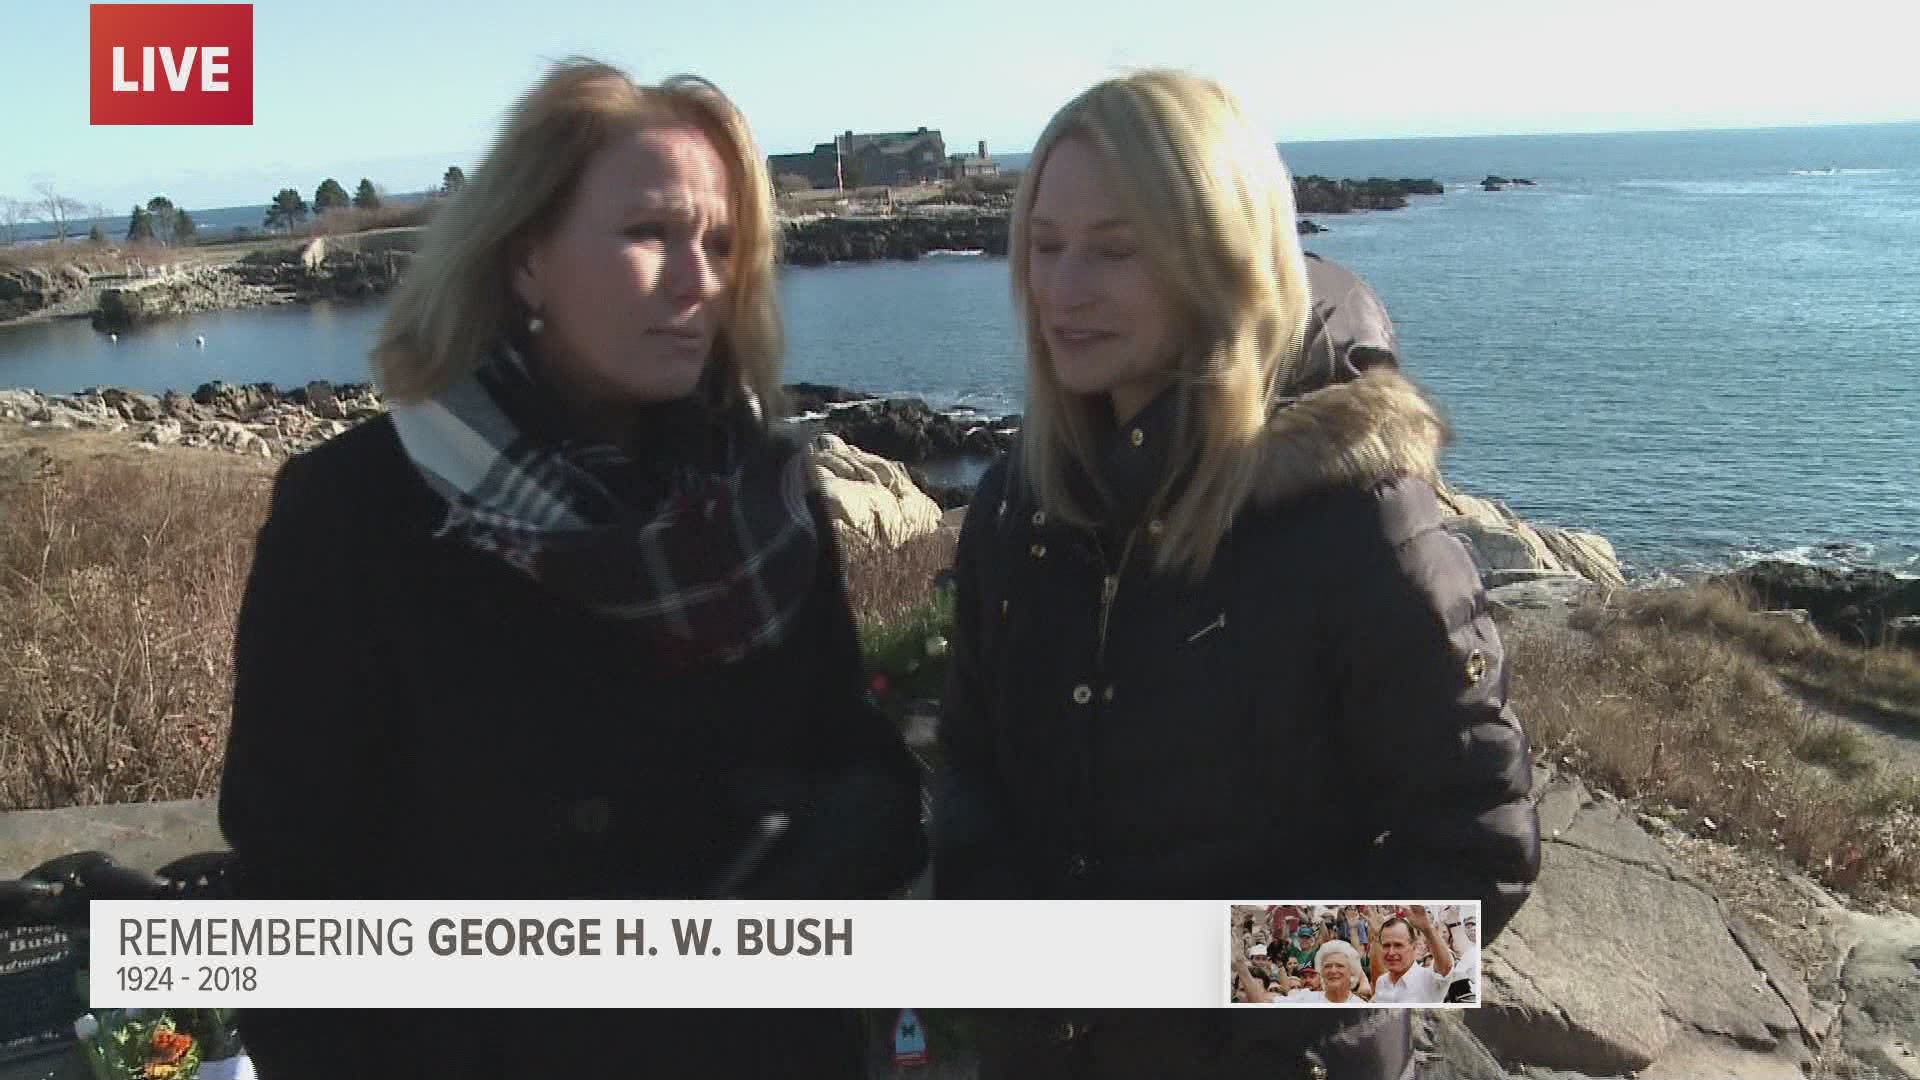 Many people came to Walker's Point to pay tribute to George H.W. Bush